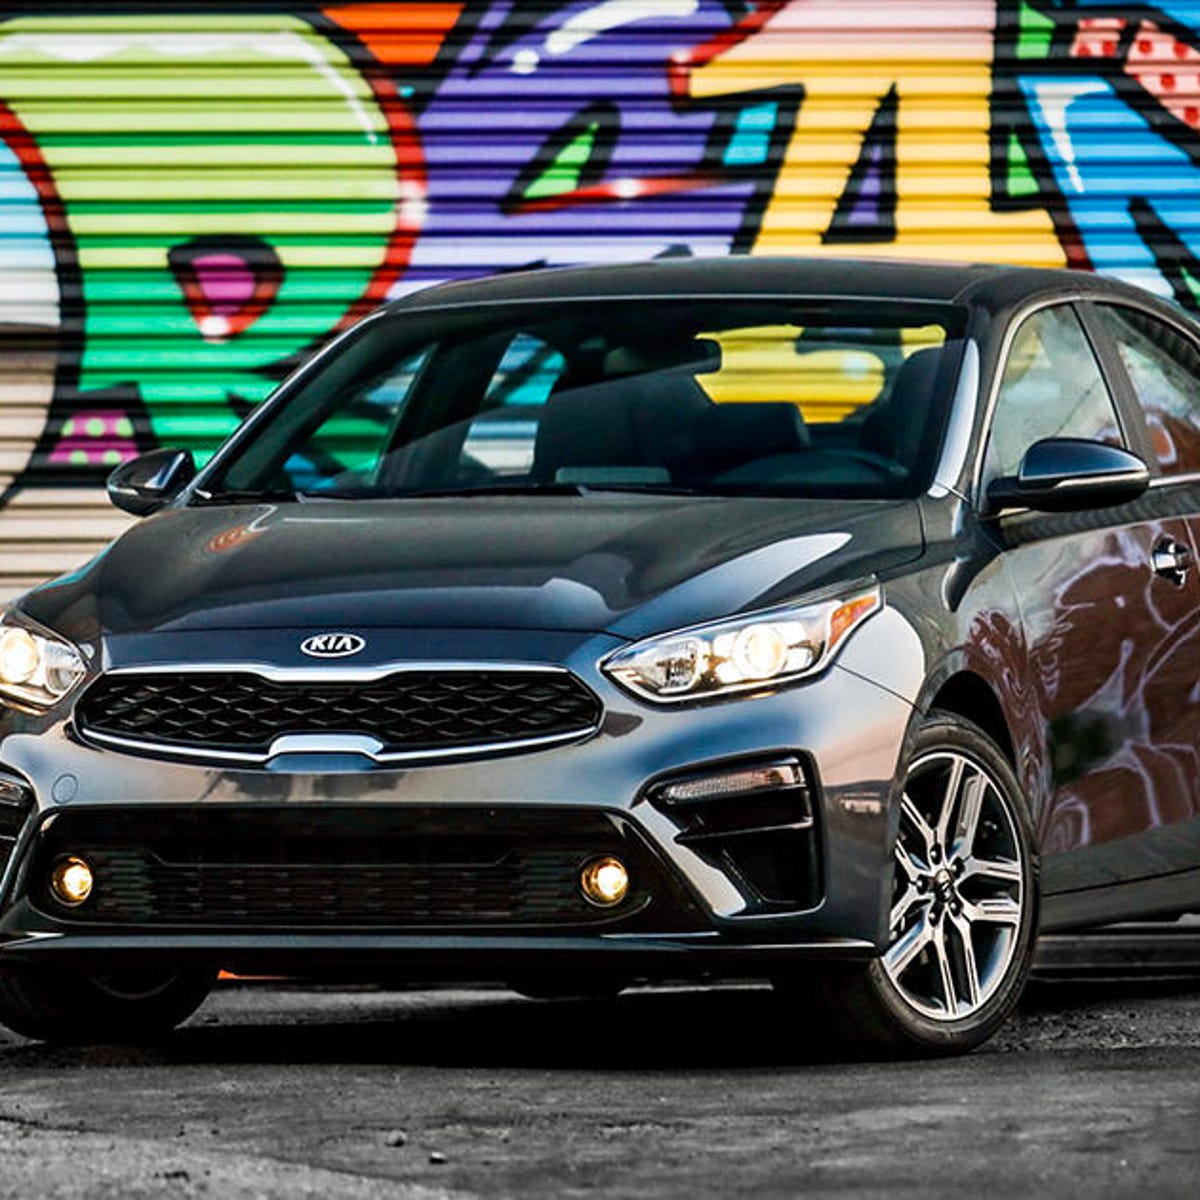 2019 Kia Forte review: Built for the long haul - CNET